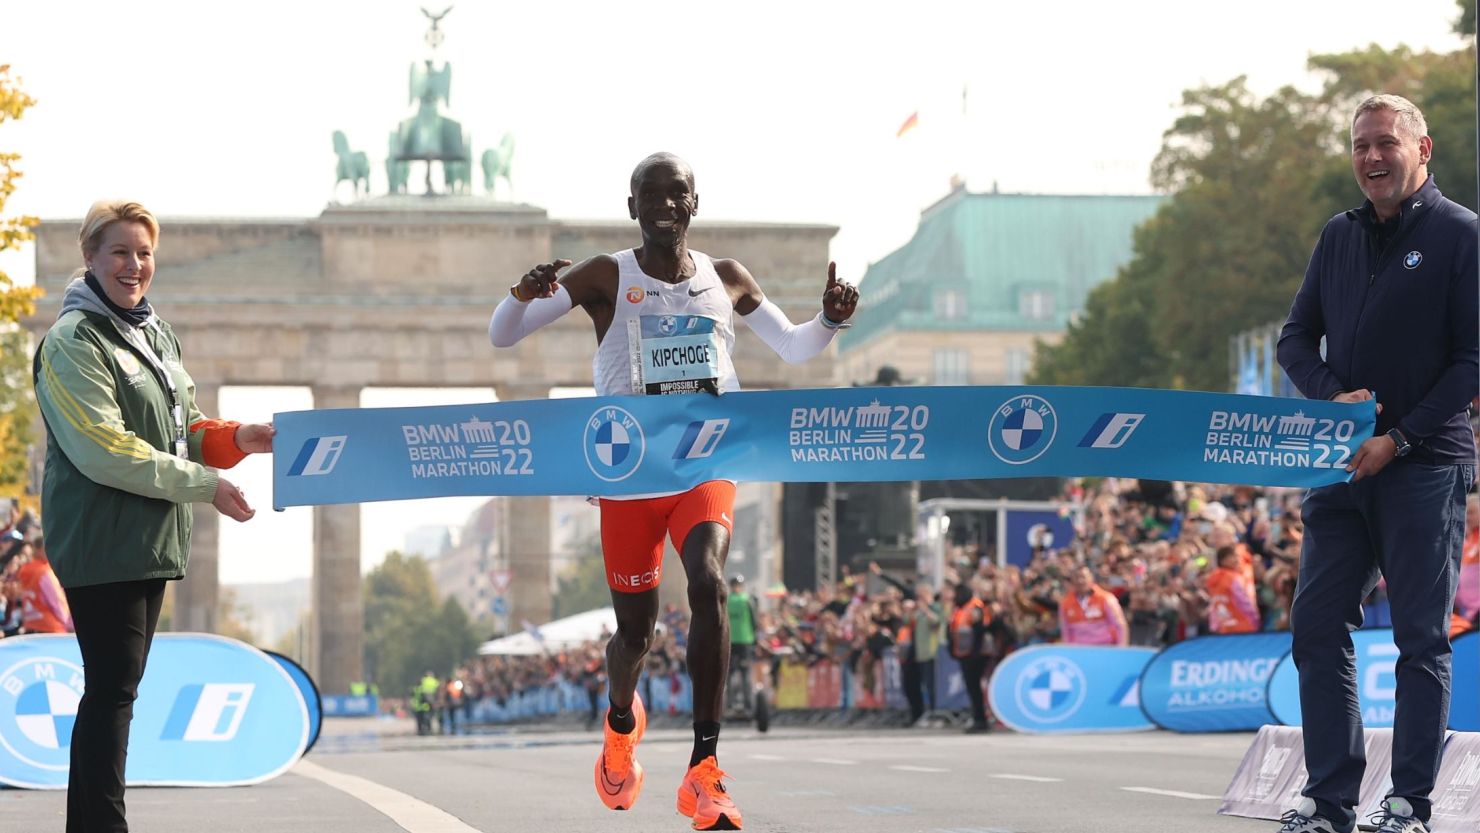 Two decades since Tergat became the first to go sub 2:05